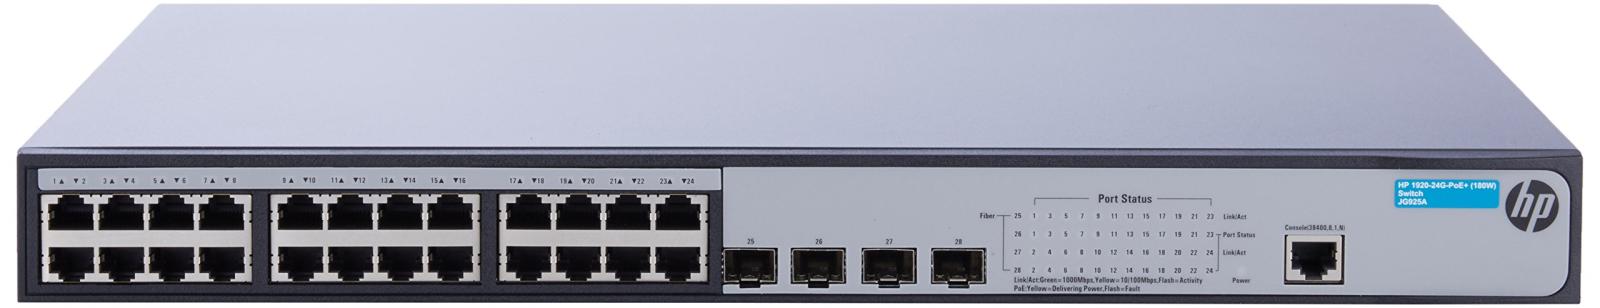 HPE OfficeConnect 1920 24G PoE+ (180W) Switch | JG925A